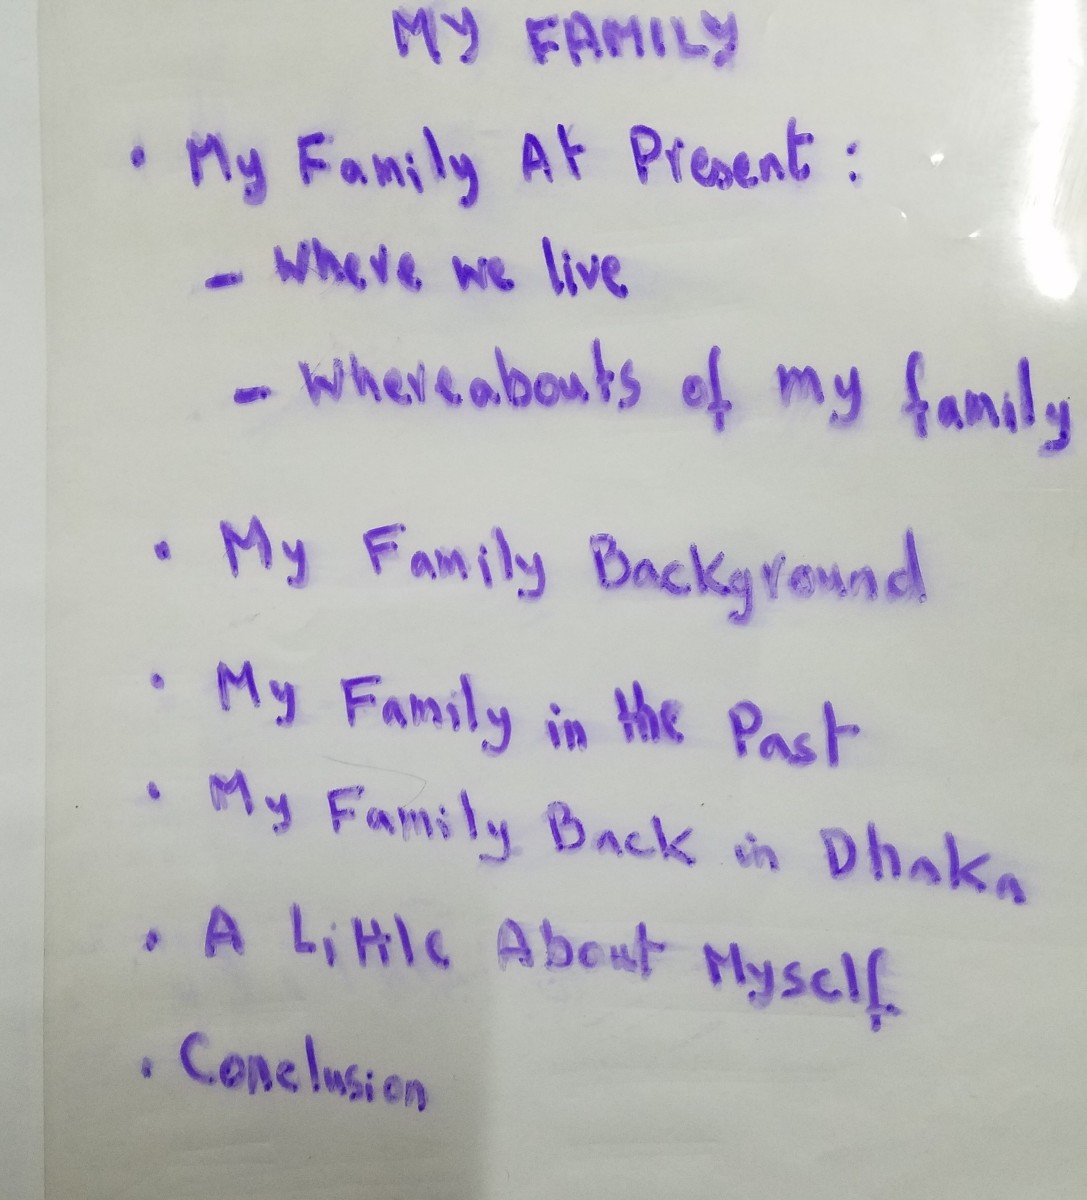 Pic: Jotted Down Points about My Family on My Transparency